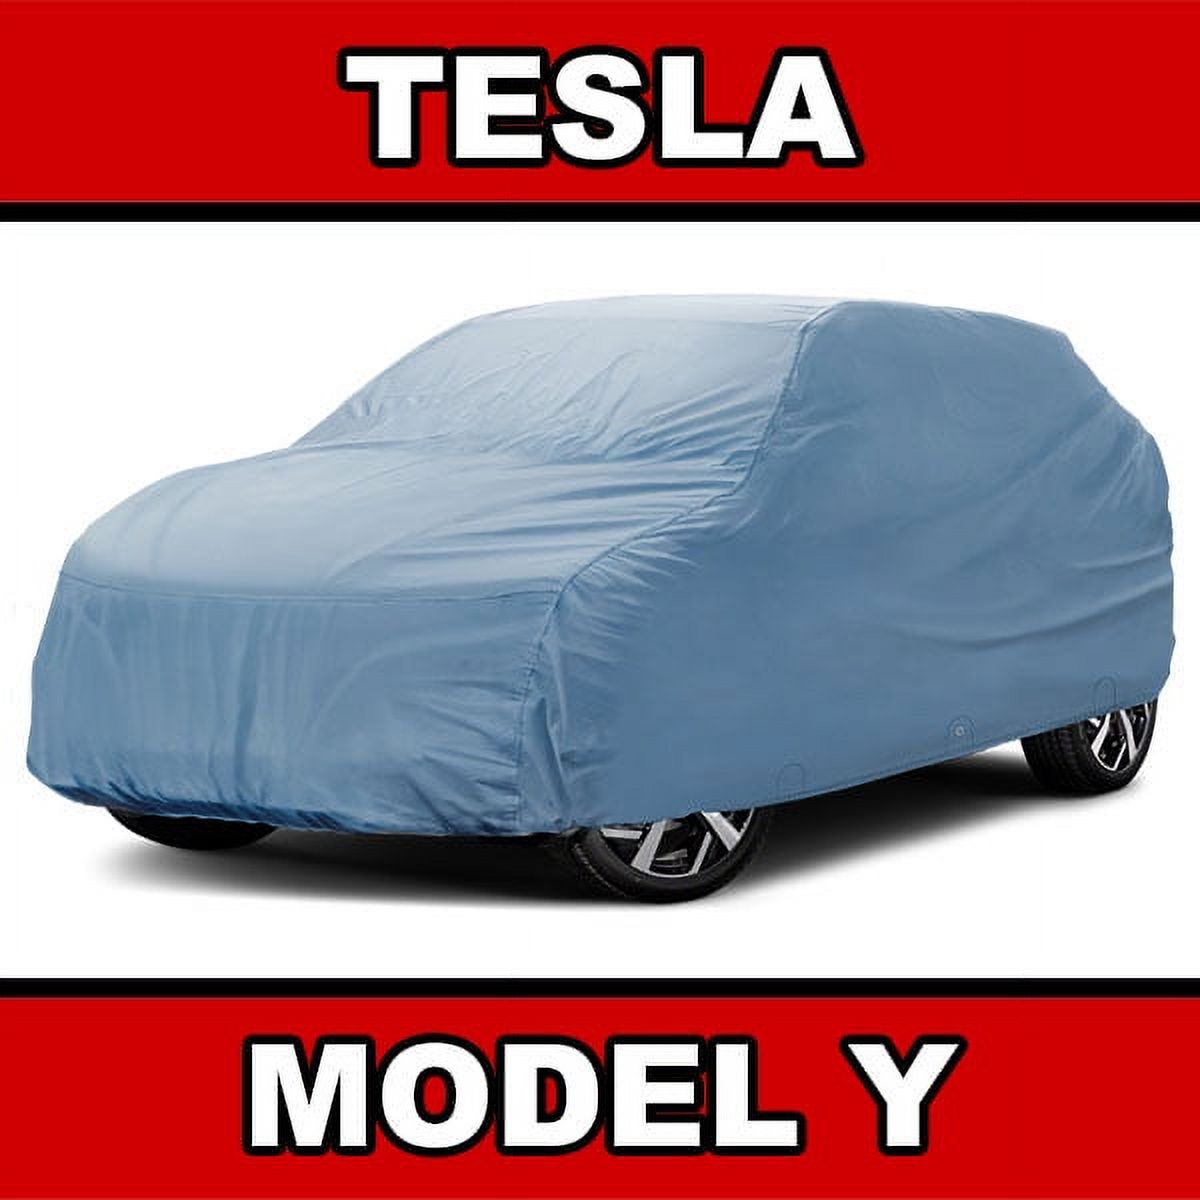 iCarCover Fits [Tesla Model Y] 2020 2021 2022 2023 For Automobiles Waterproof Full Exterior Hail Snow Indoor Outdoor Protection Heavy Duty Custom Vehicle SUV Car Cover - image 1 of 3